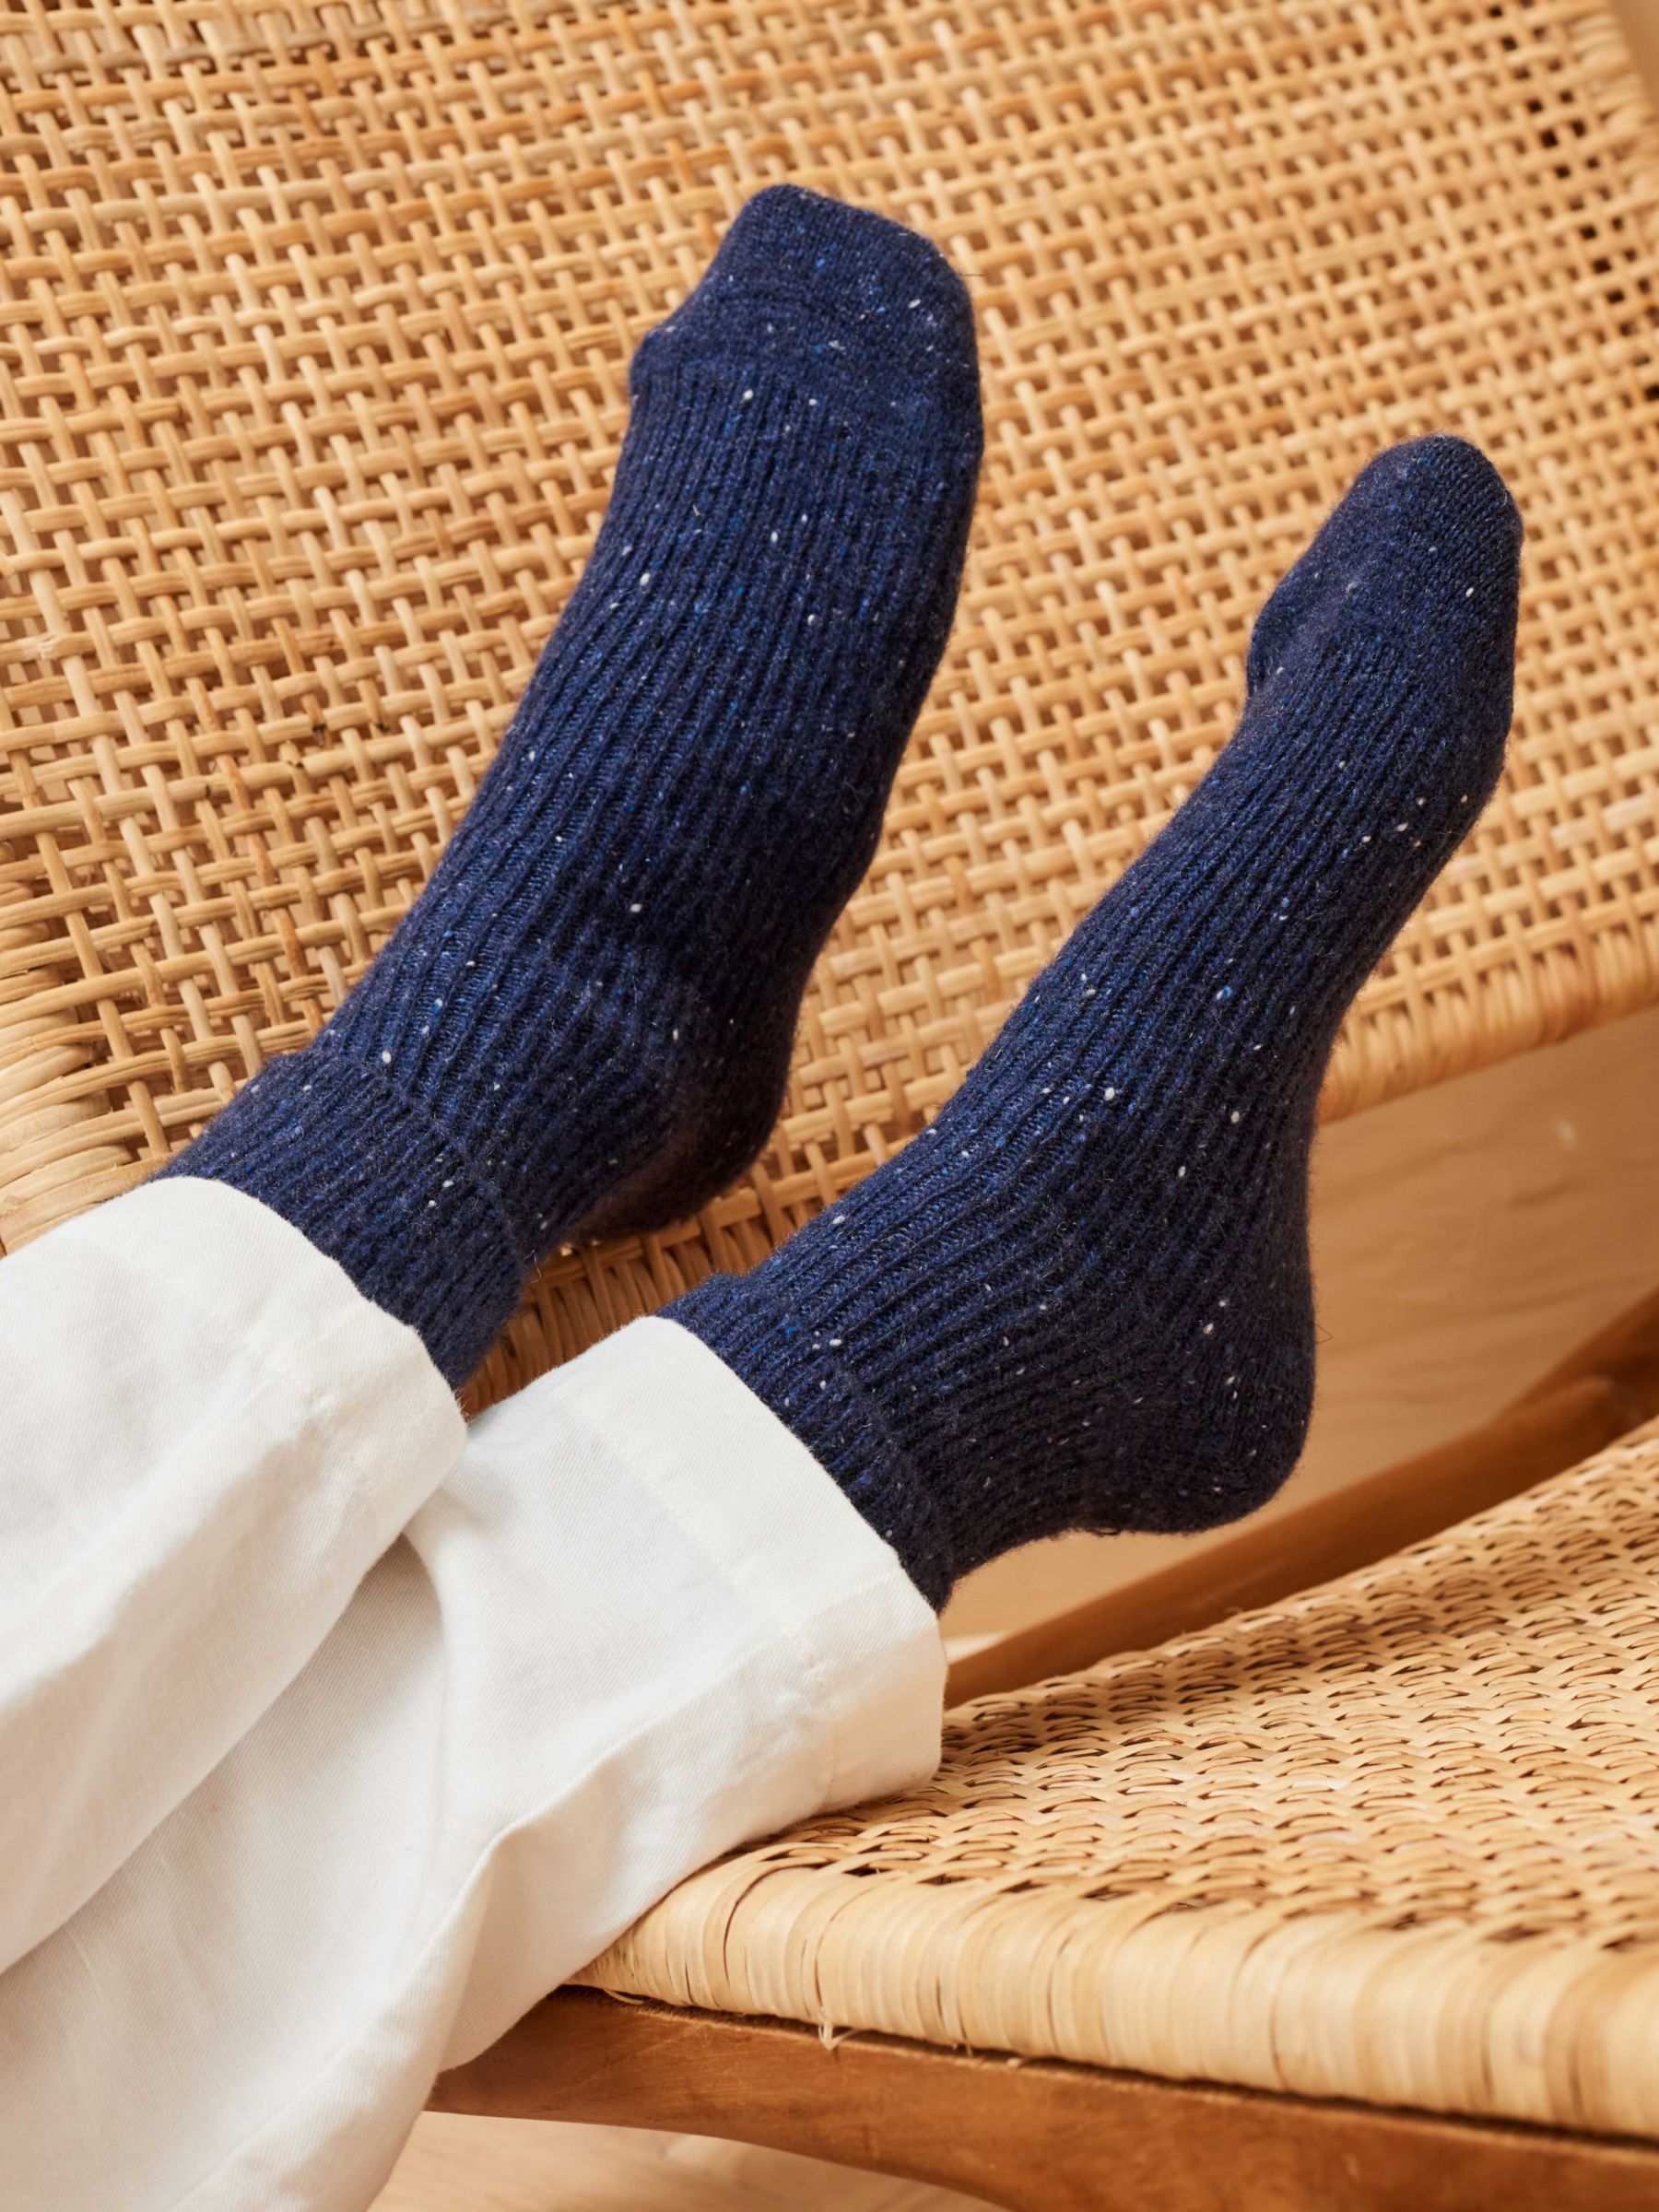 Brora Donegal Cashmere Blend Socks, French Navy, 4-5